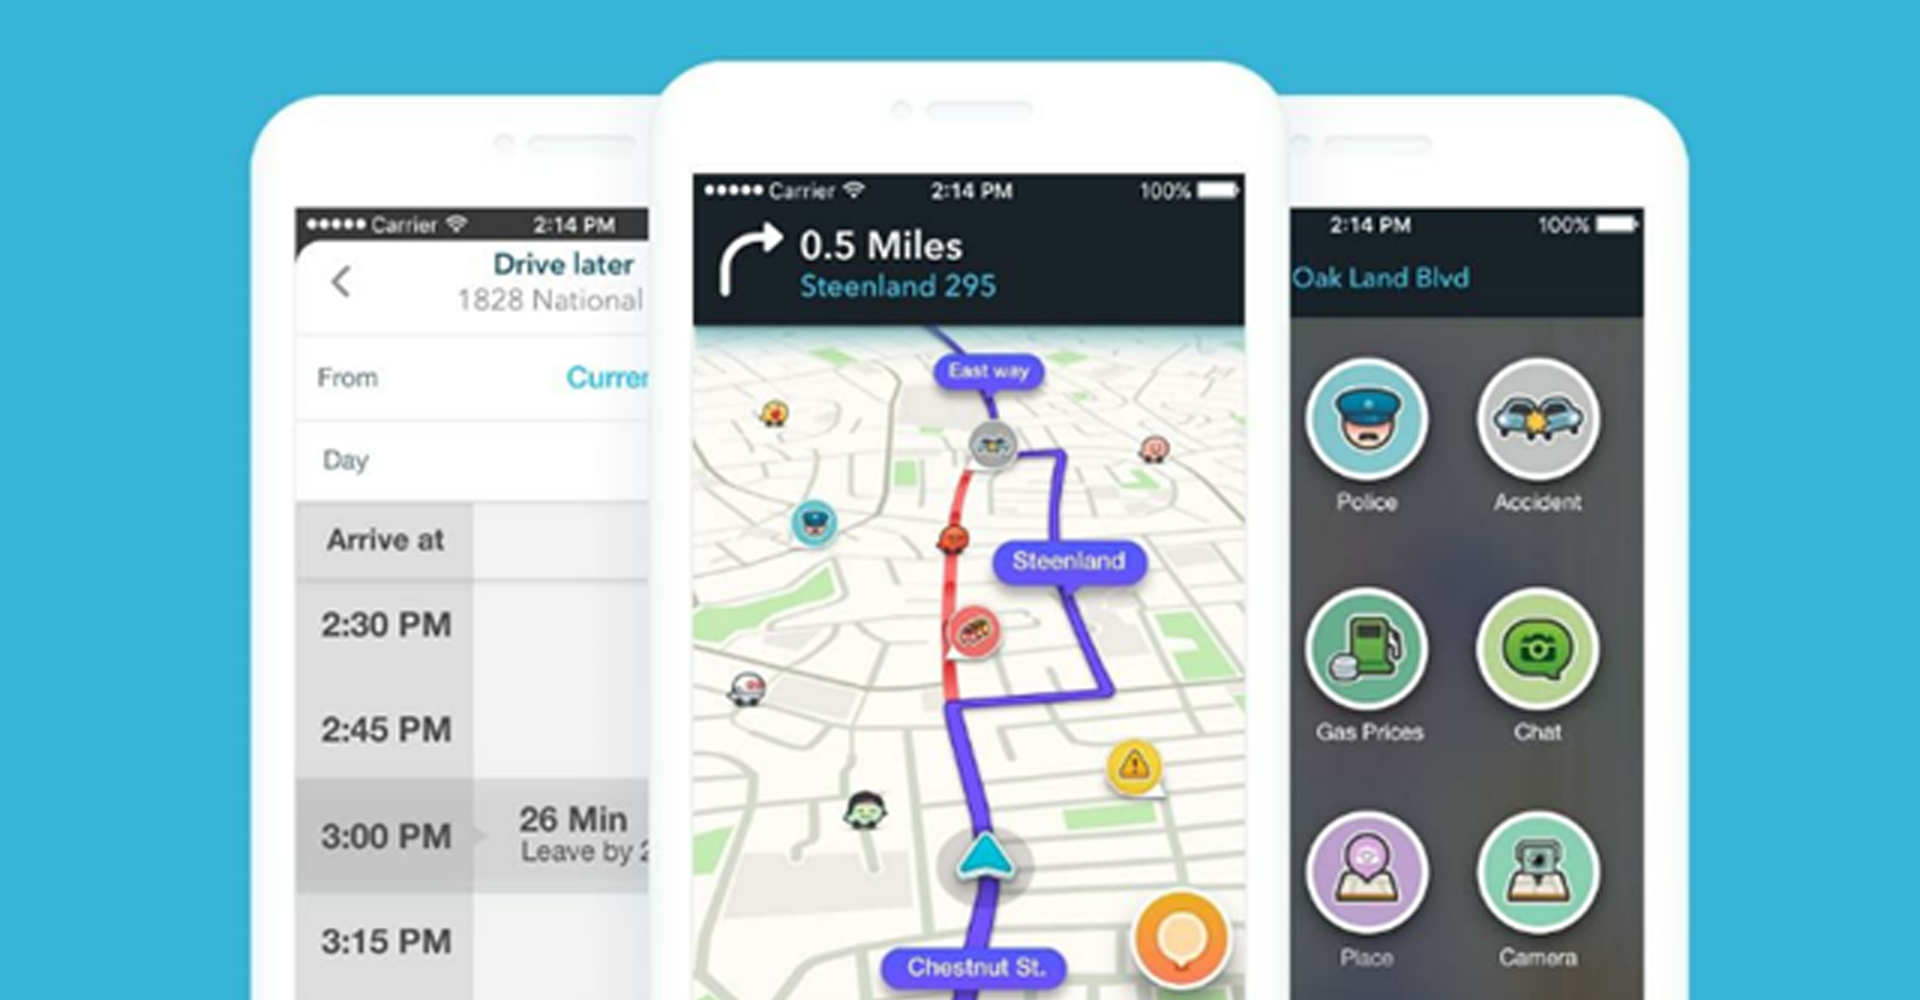 One great example of this is the Waze app